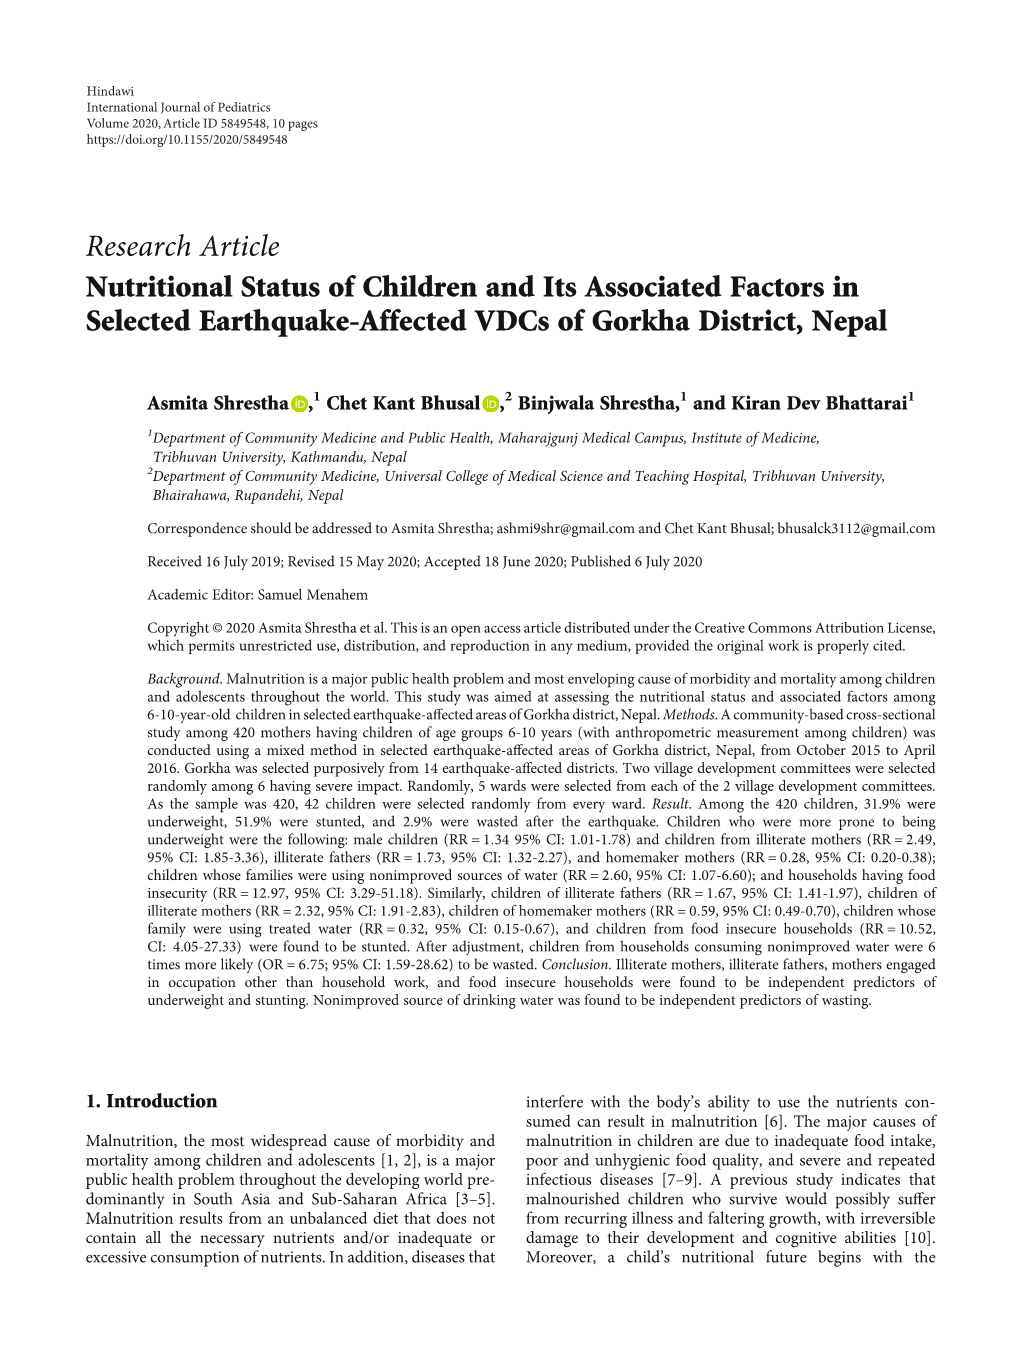 Research Article Nutritional Status of Children and Its Associated Factors in Selected Earthquake-Affected Vdcs of Gorkha District, Nepal